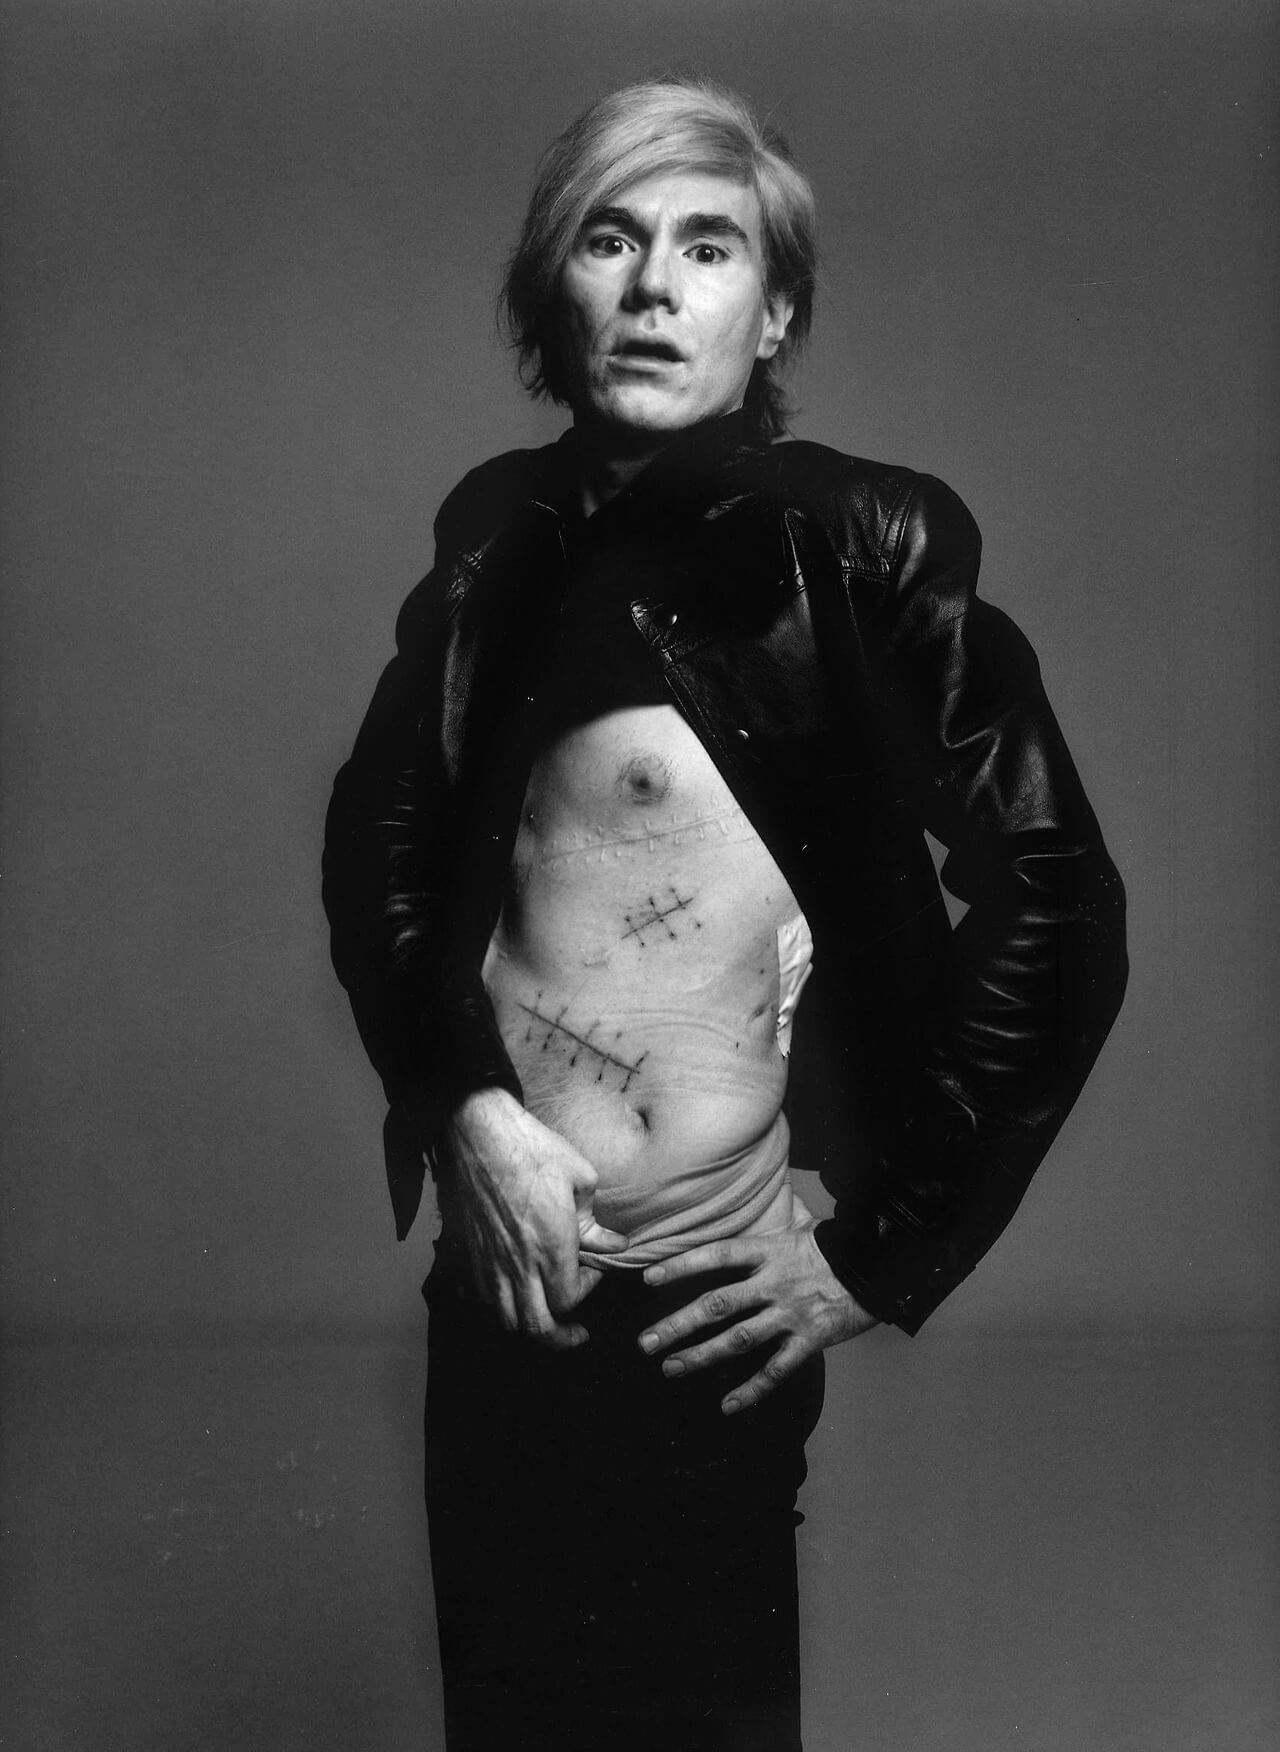 Richard Avedon's 1969 portrait of Andy Warhol, revealing his surgical scars.